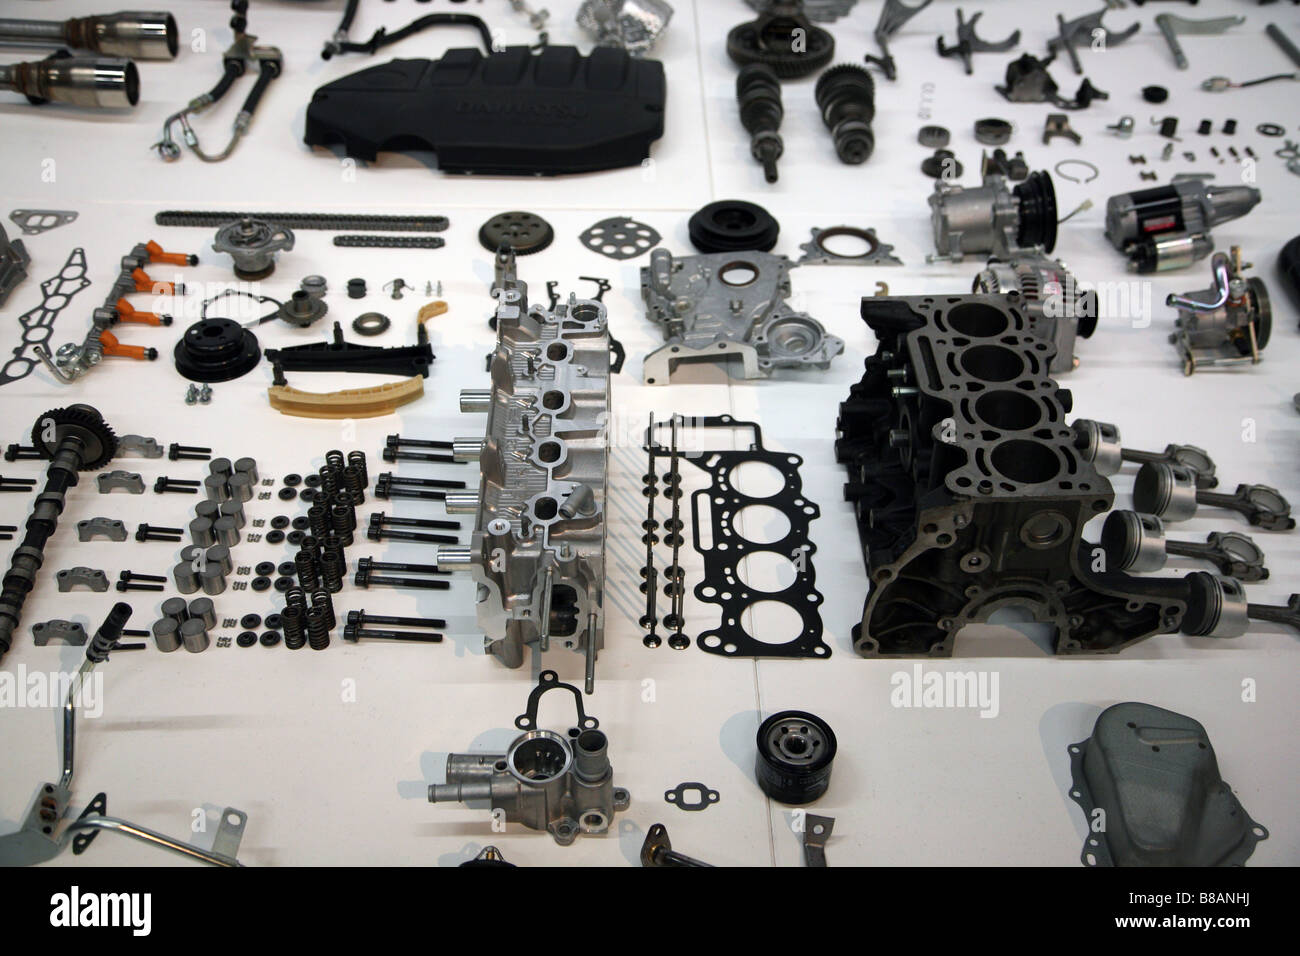 Display of Daihatsu car components in Science Museum, London Stock Photo